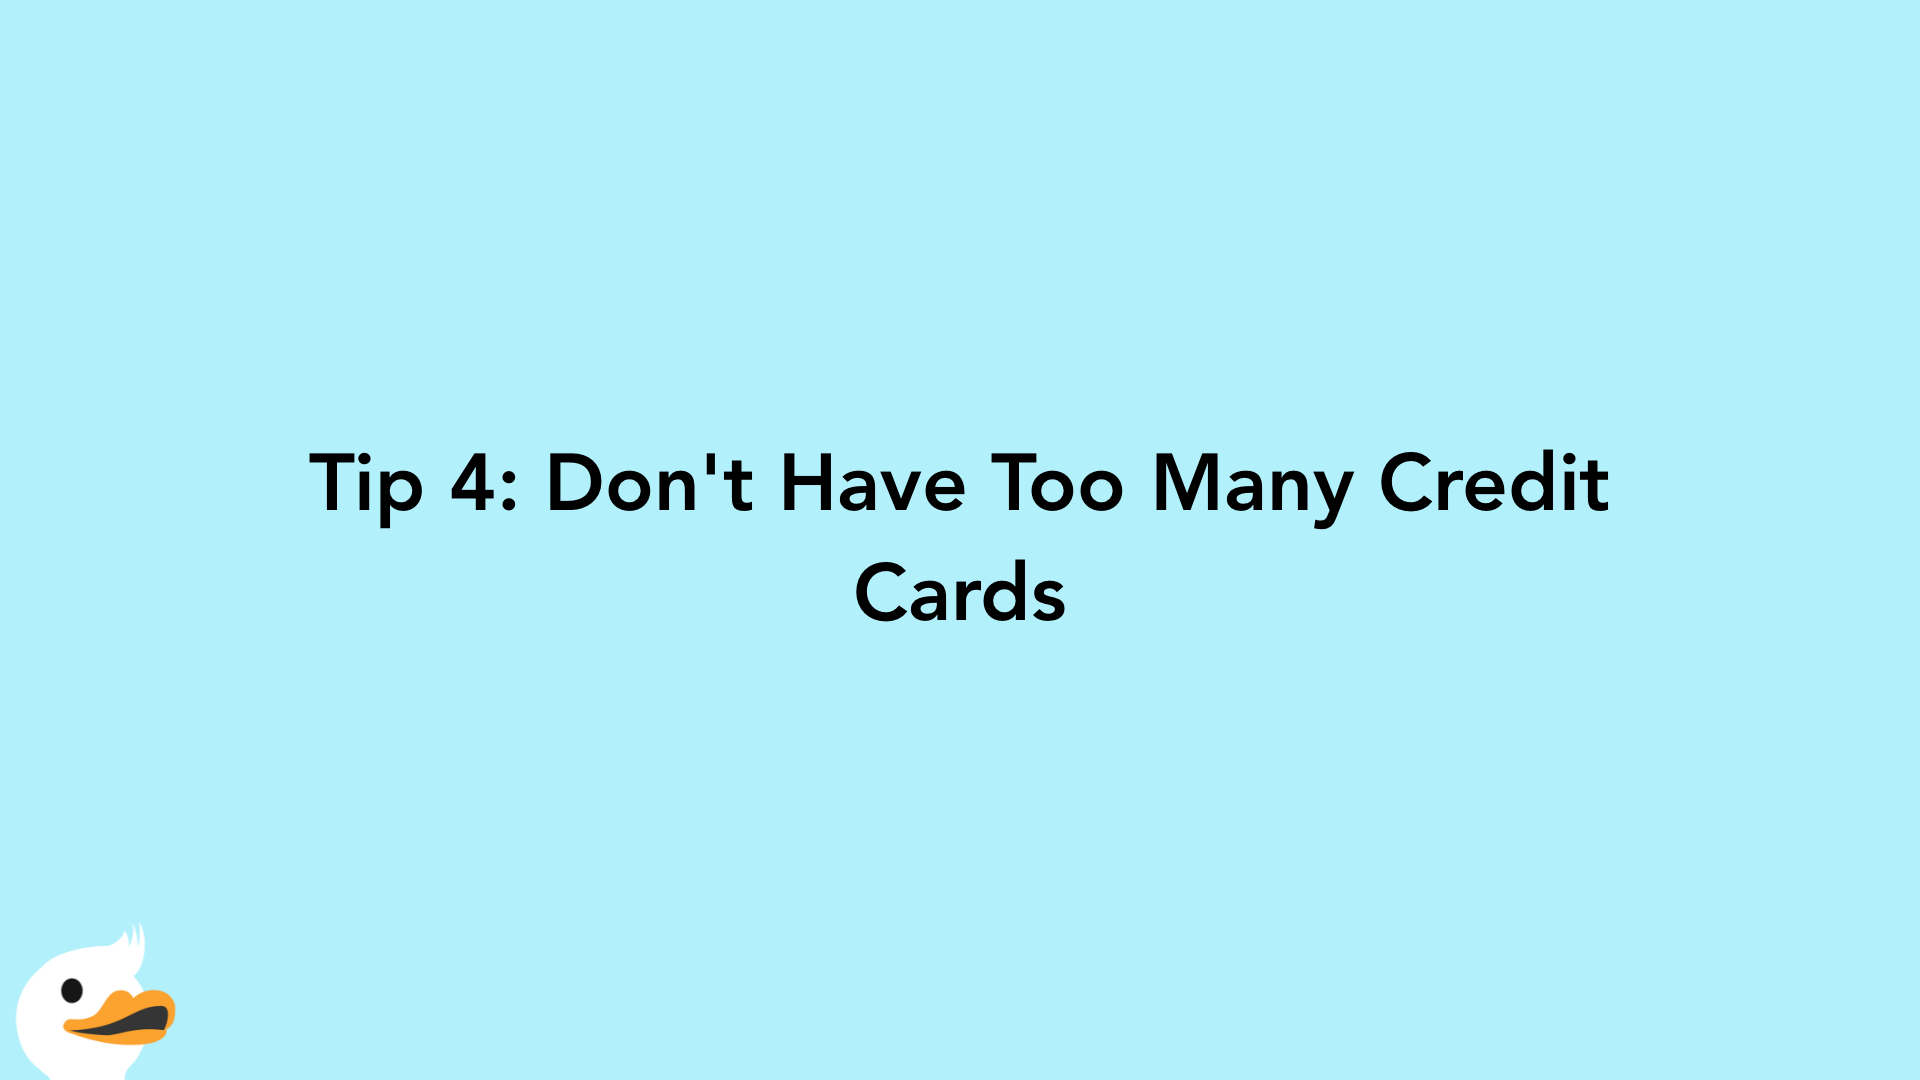 Tip 4: Don't Have Too Many Credit Cards